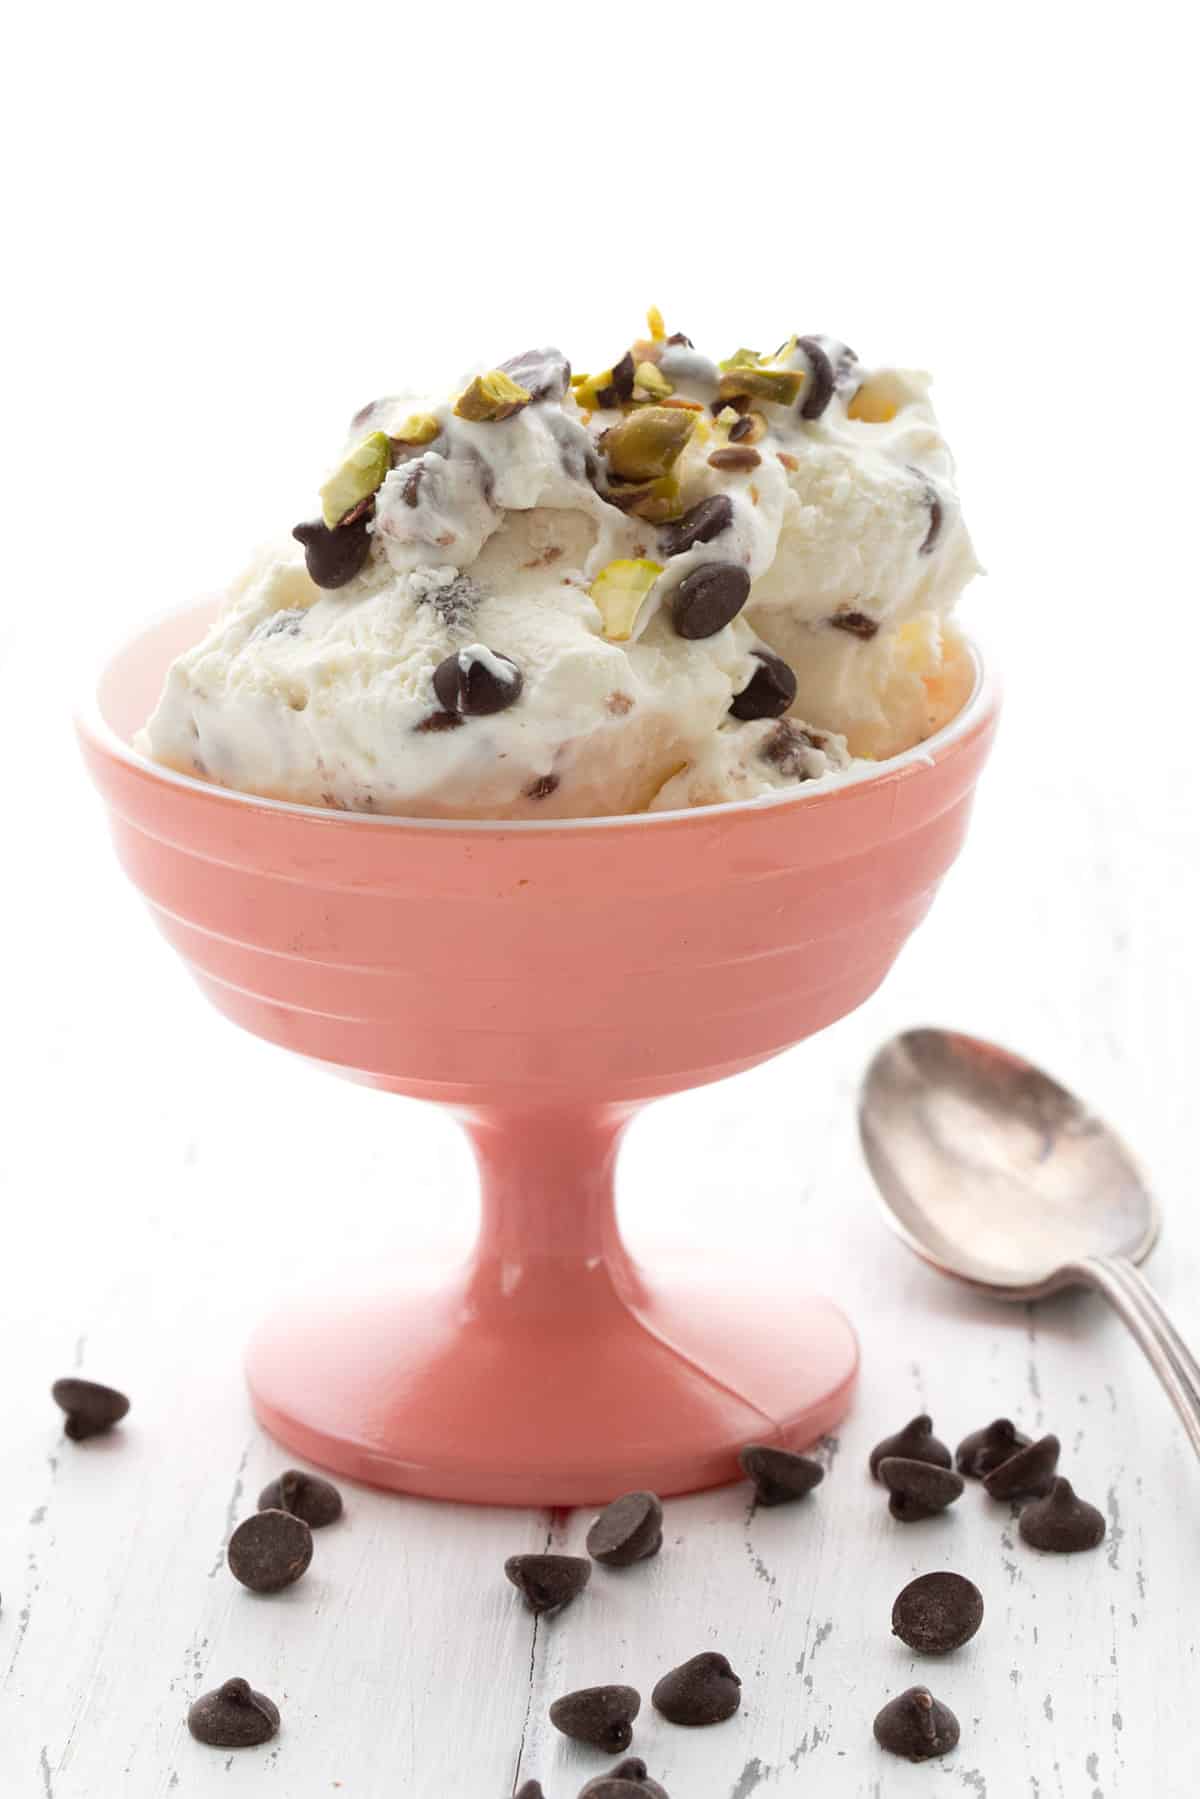 A pink ice cream dish with keto cannoli ice cream, with chocolate chips strewn around.